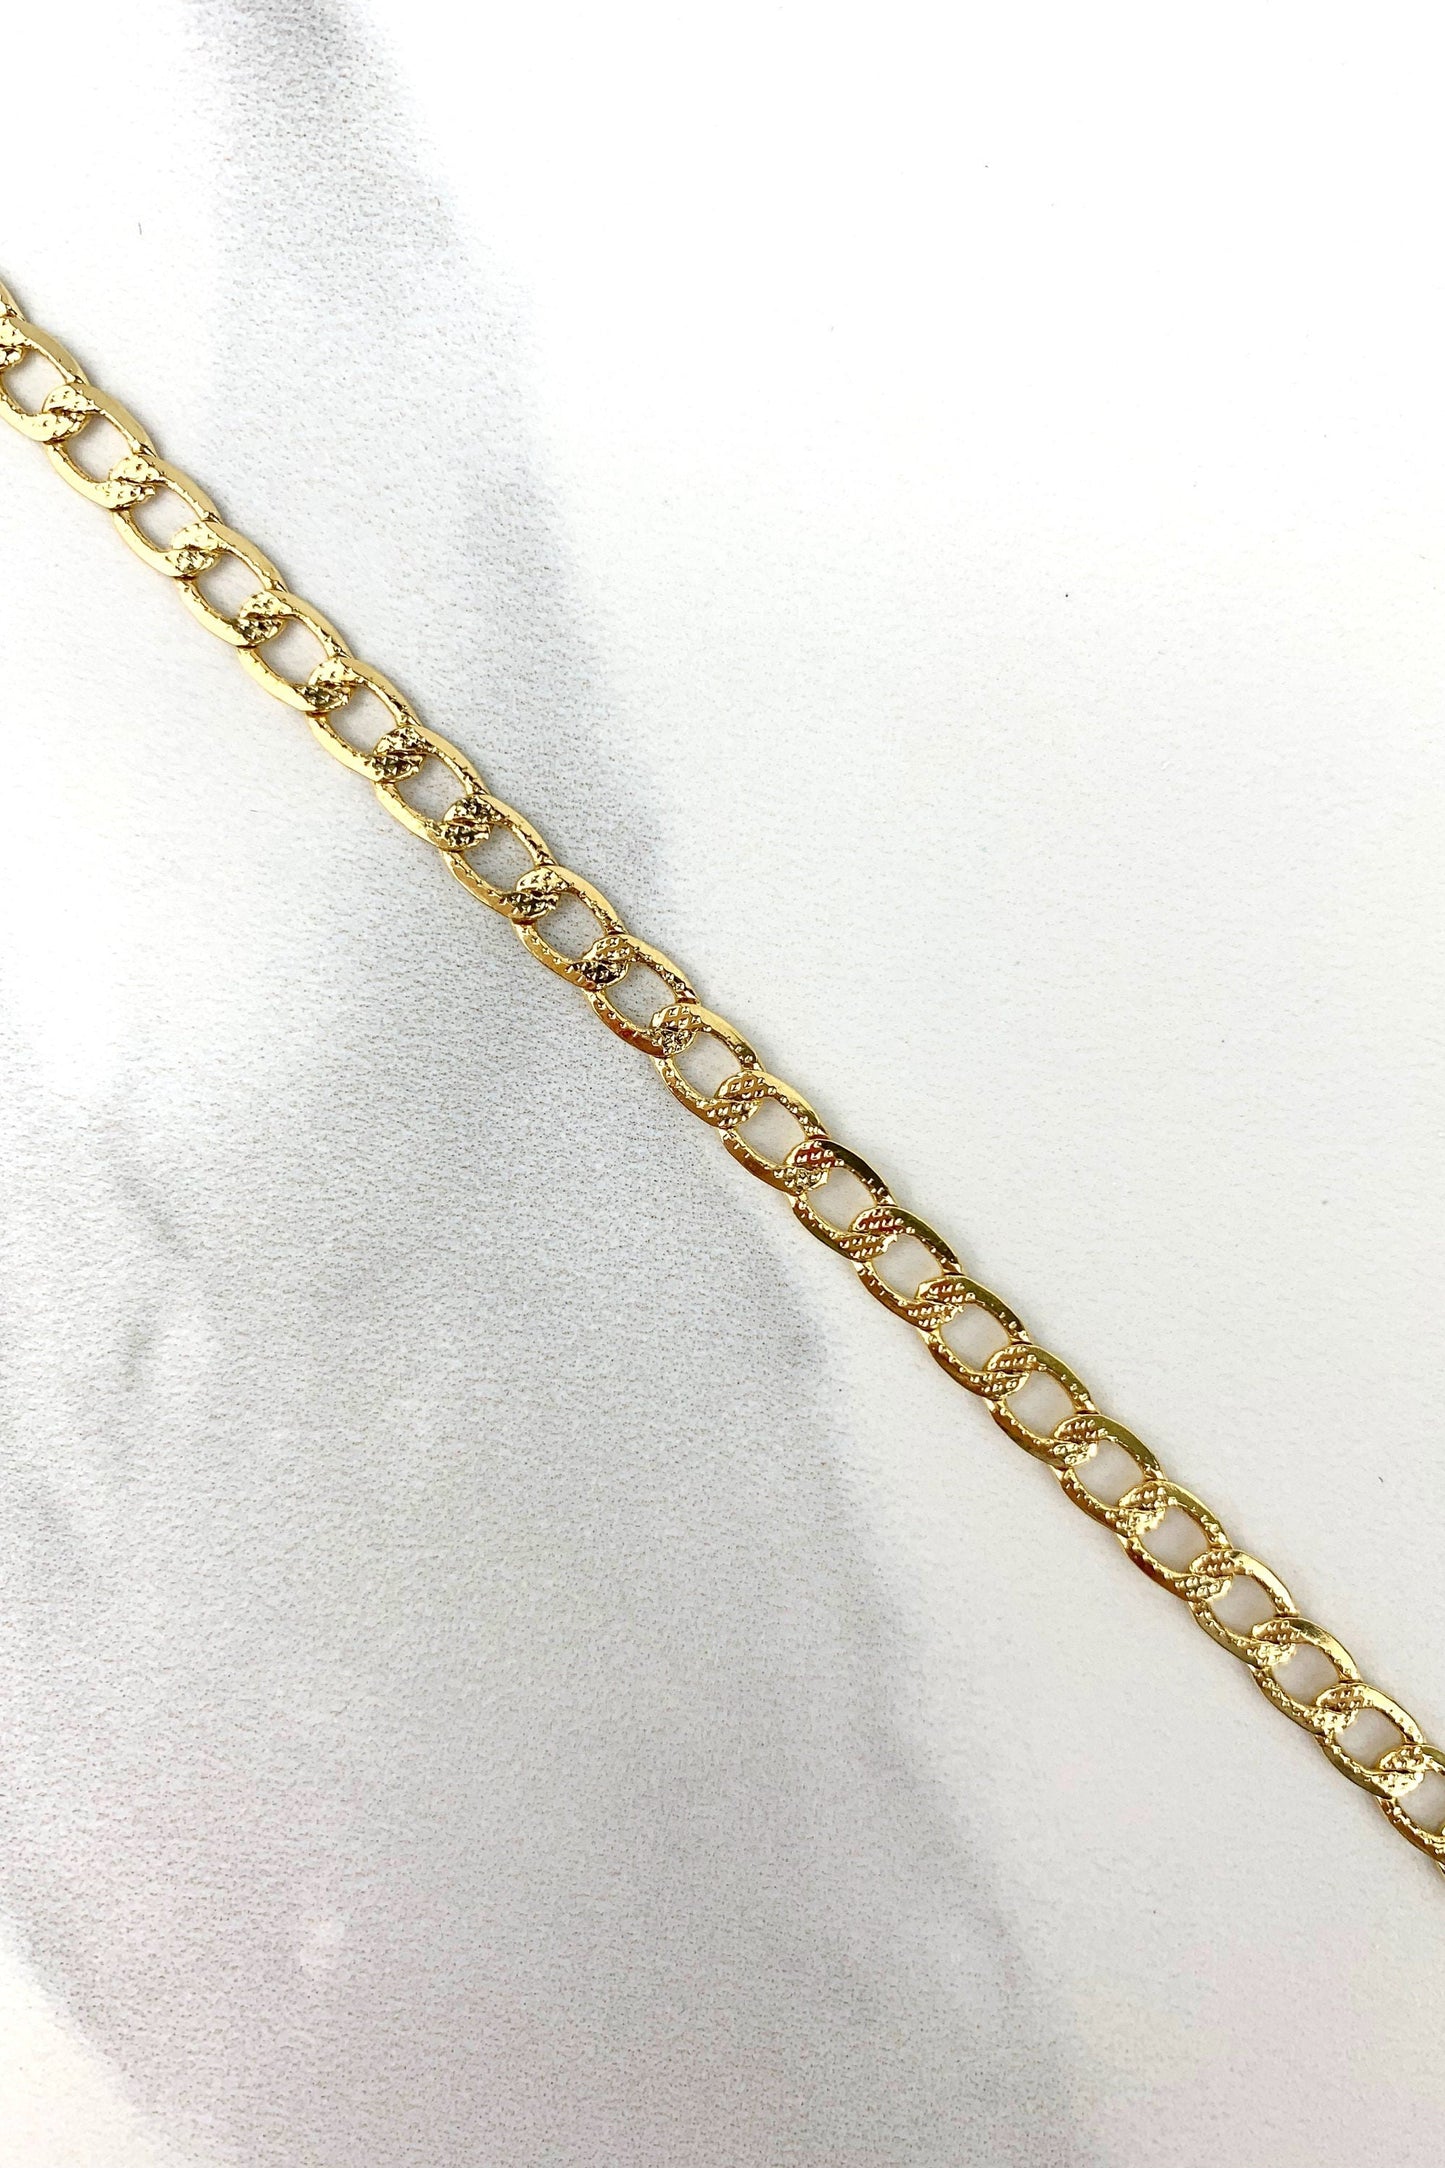 18k Gold Filled 4.5mm Open Cuban Link Chain, Curb Link Necklace, Wholesale Jewelry Making Supplies